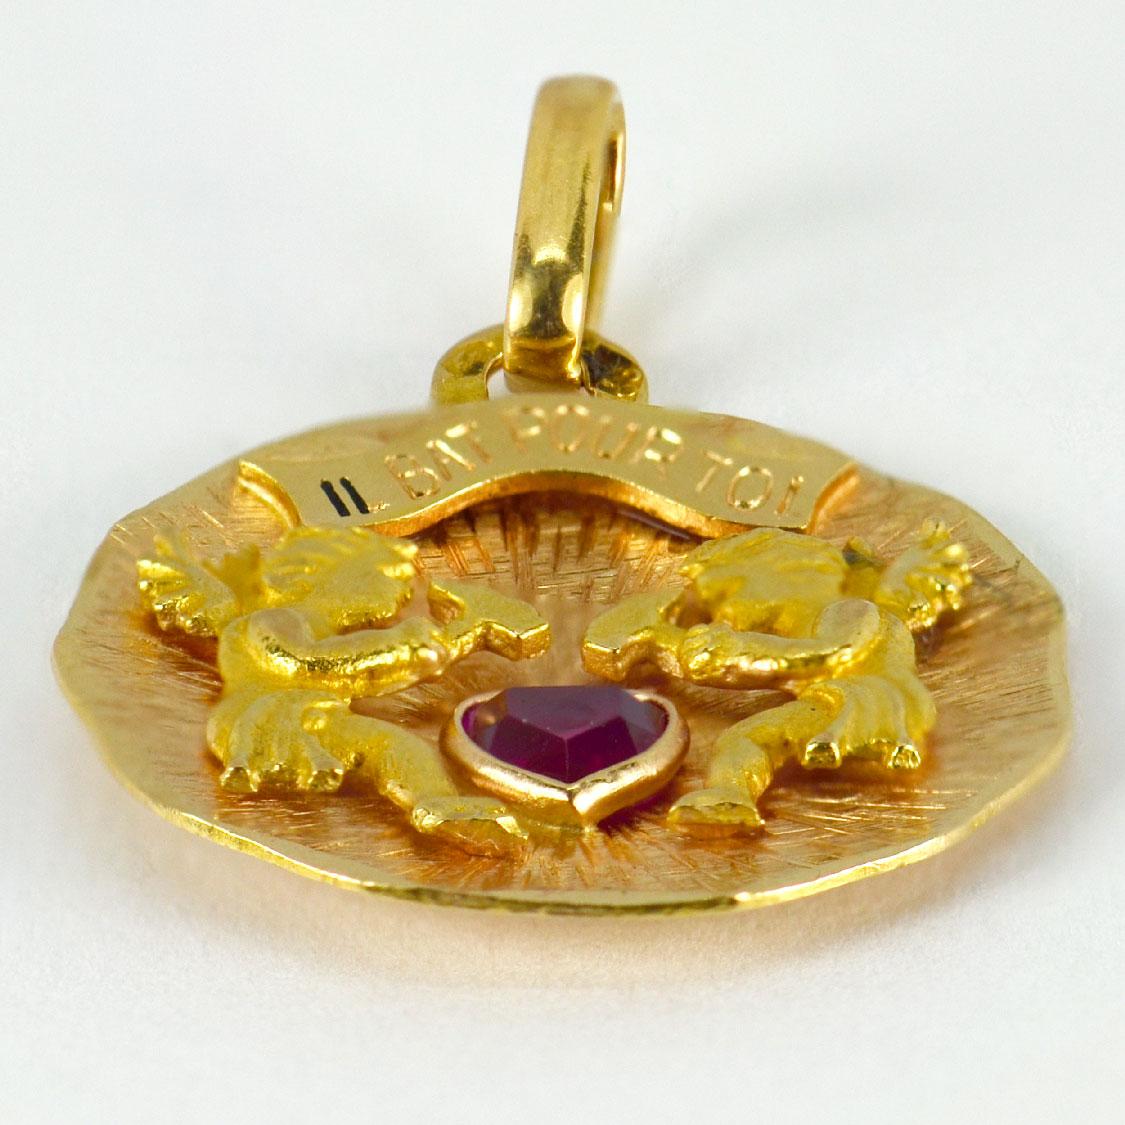 A French 18 karat (18K) yellow gold charm pendant designed as a disk with two yellow gold cupid figures with hammers beating a synthetic ruby love heart. Above them a enamelled scroll reads 'Il bat pour toi', the whole meaning 'My heart beats for